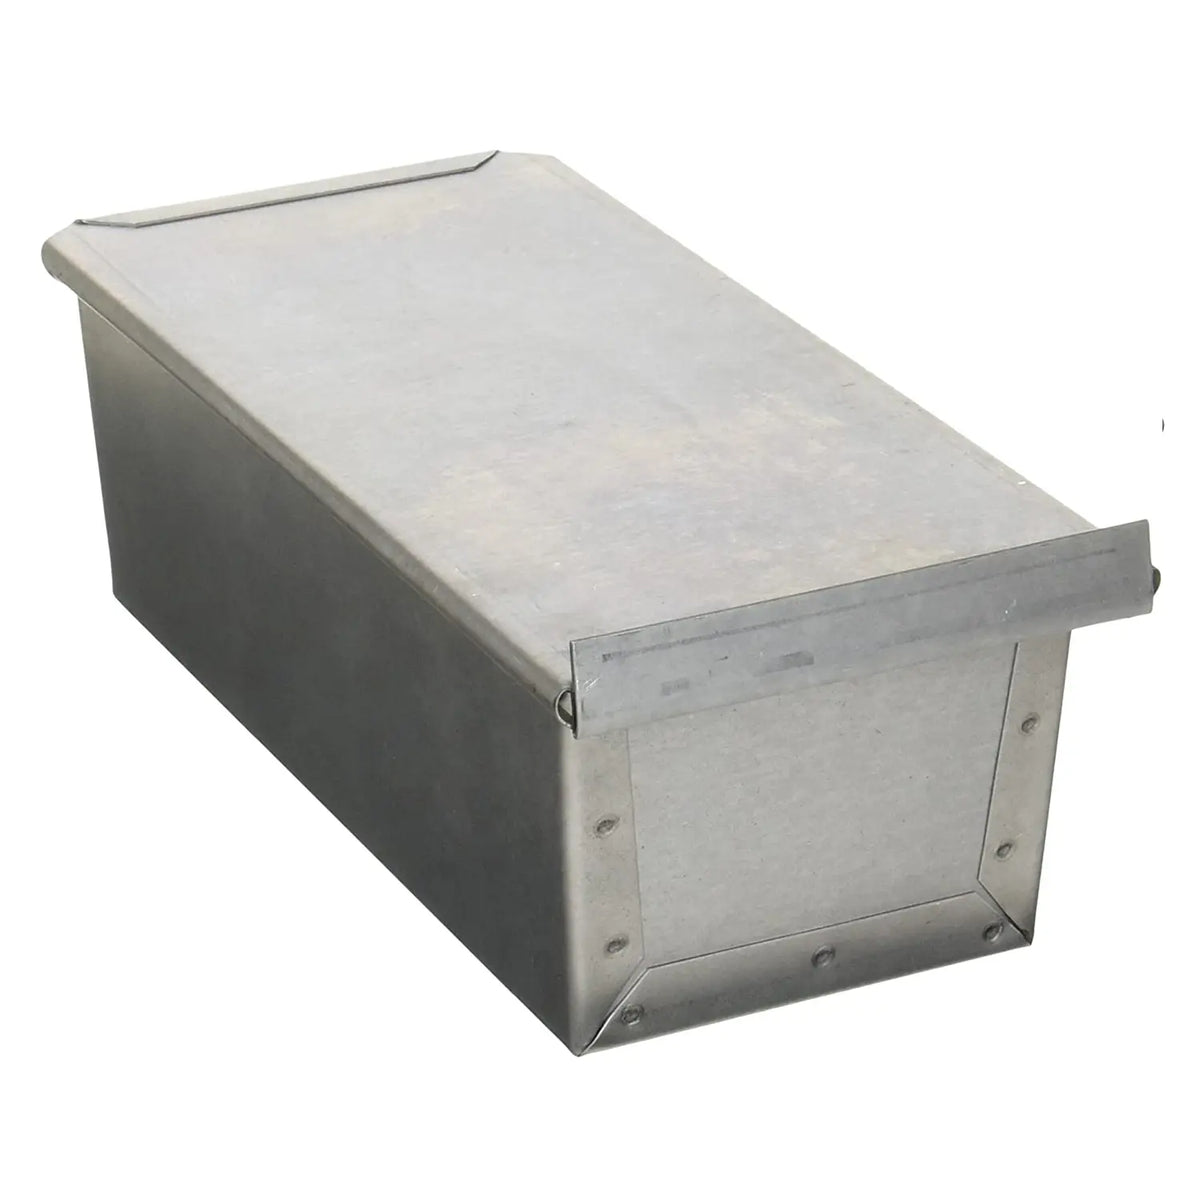 EBM Altaite Fluororesin-coated Loaf Pan